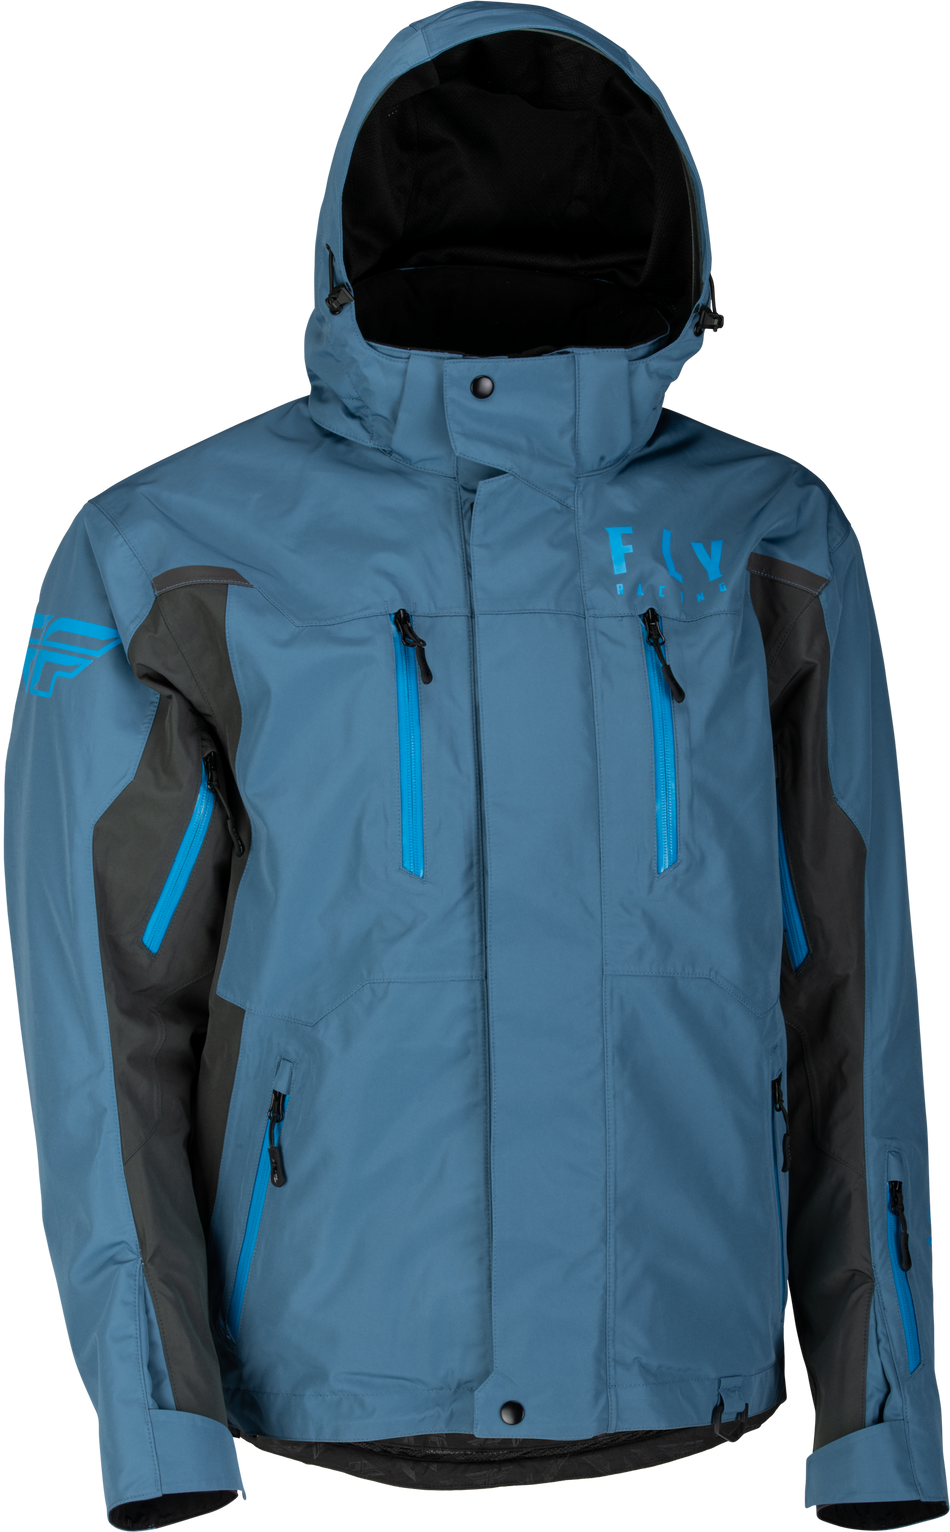 FLY RACING Incline Jacket Blue/Grey Sm 470-4104S